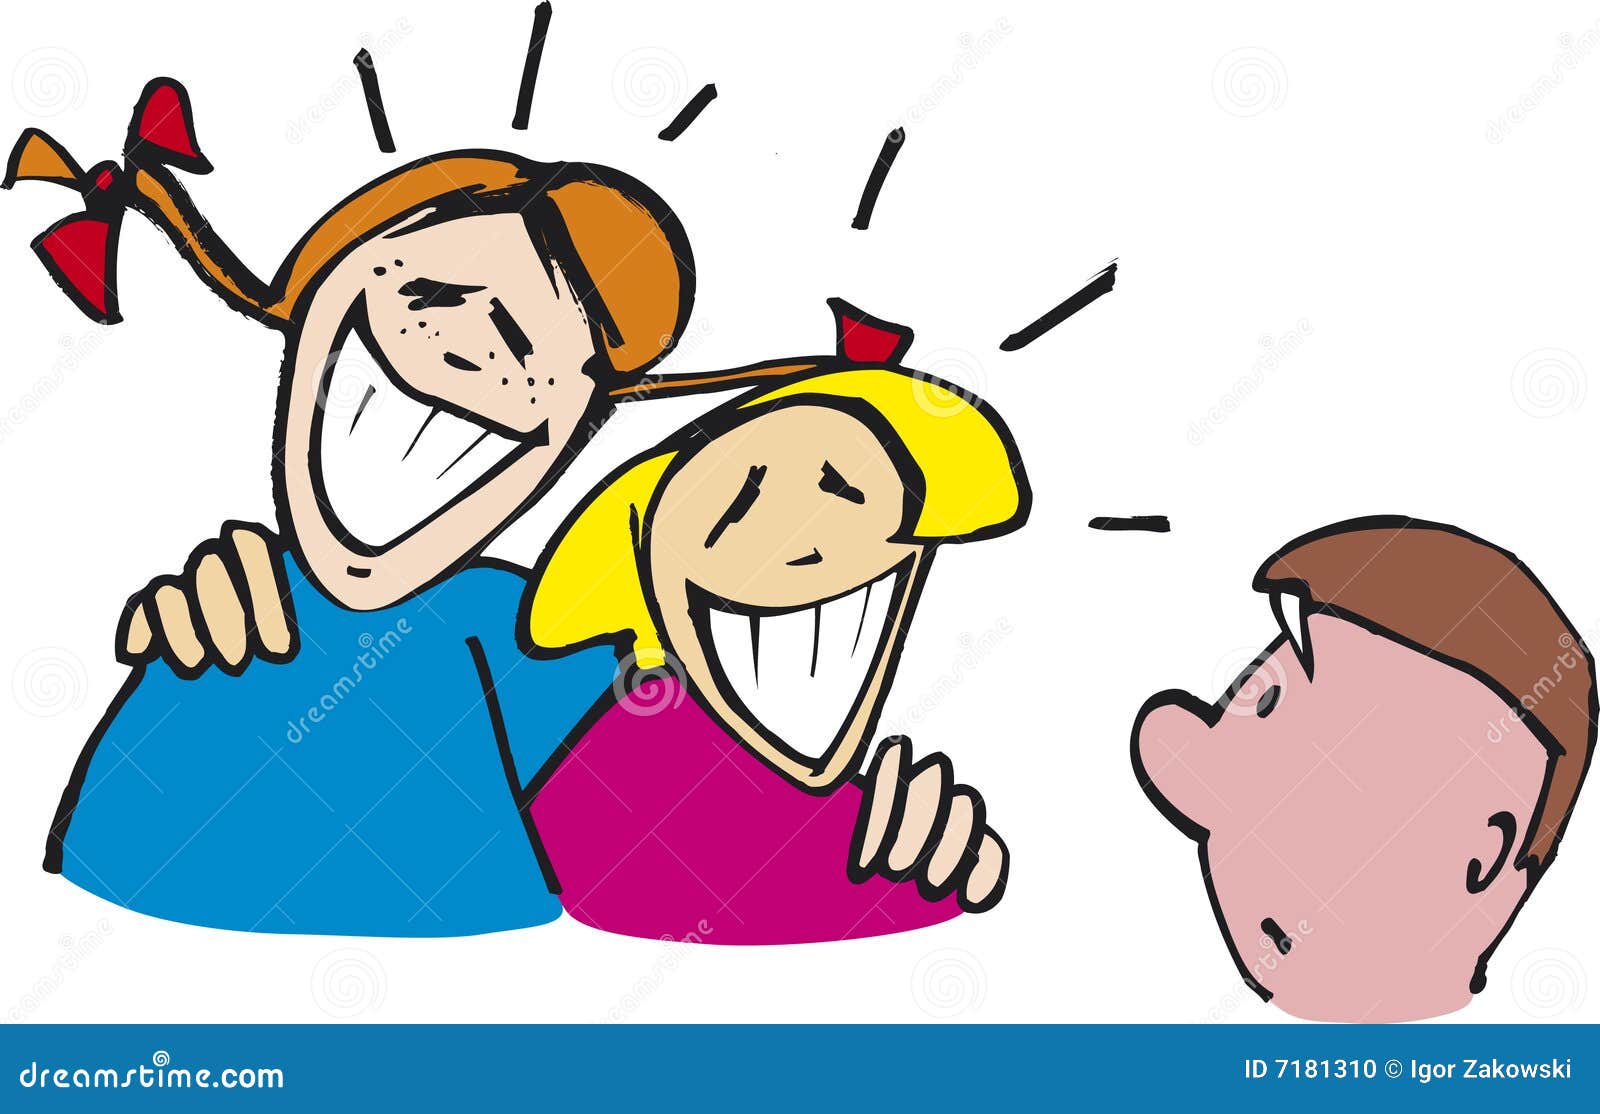 girl laughing clipart - photo #37